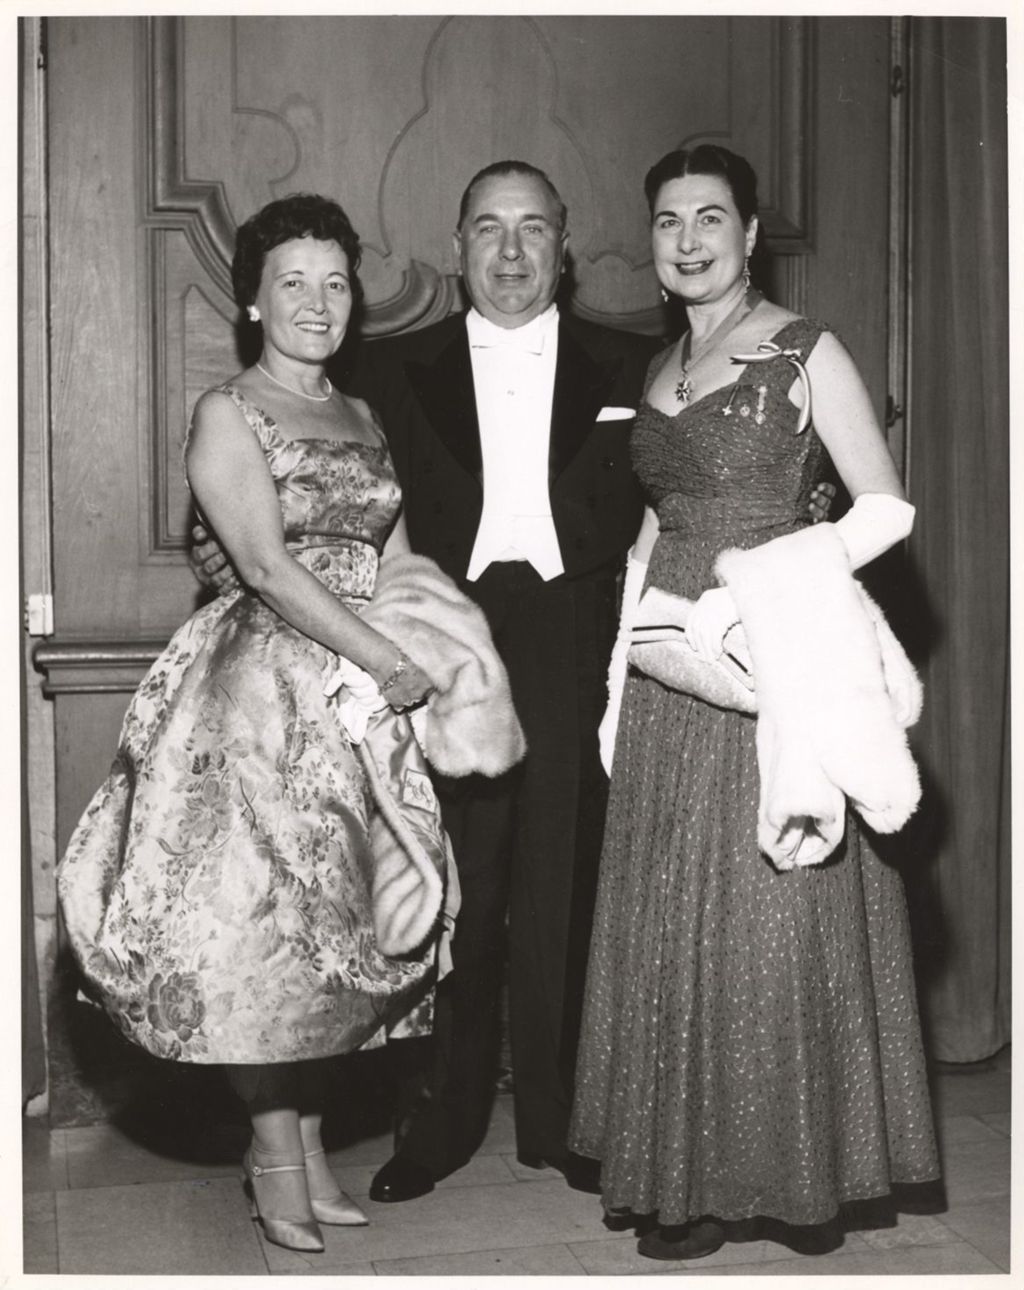 Miniature of Eleanor and Richard J. Daley with Mrs. Howard R. Peterson at Consular Ball